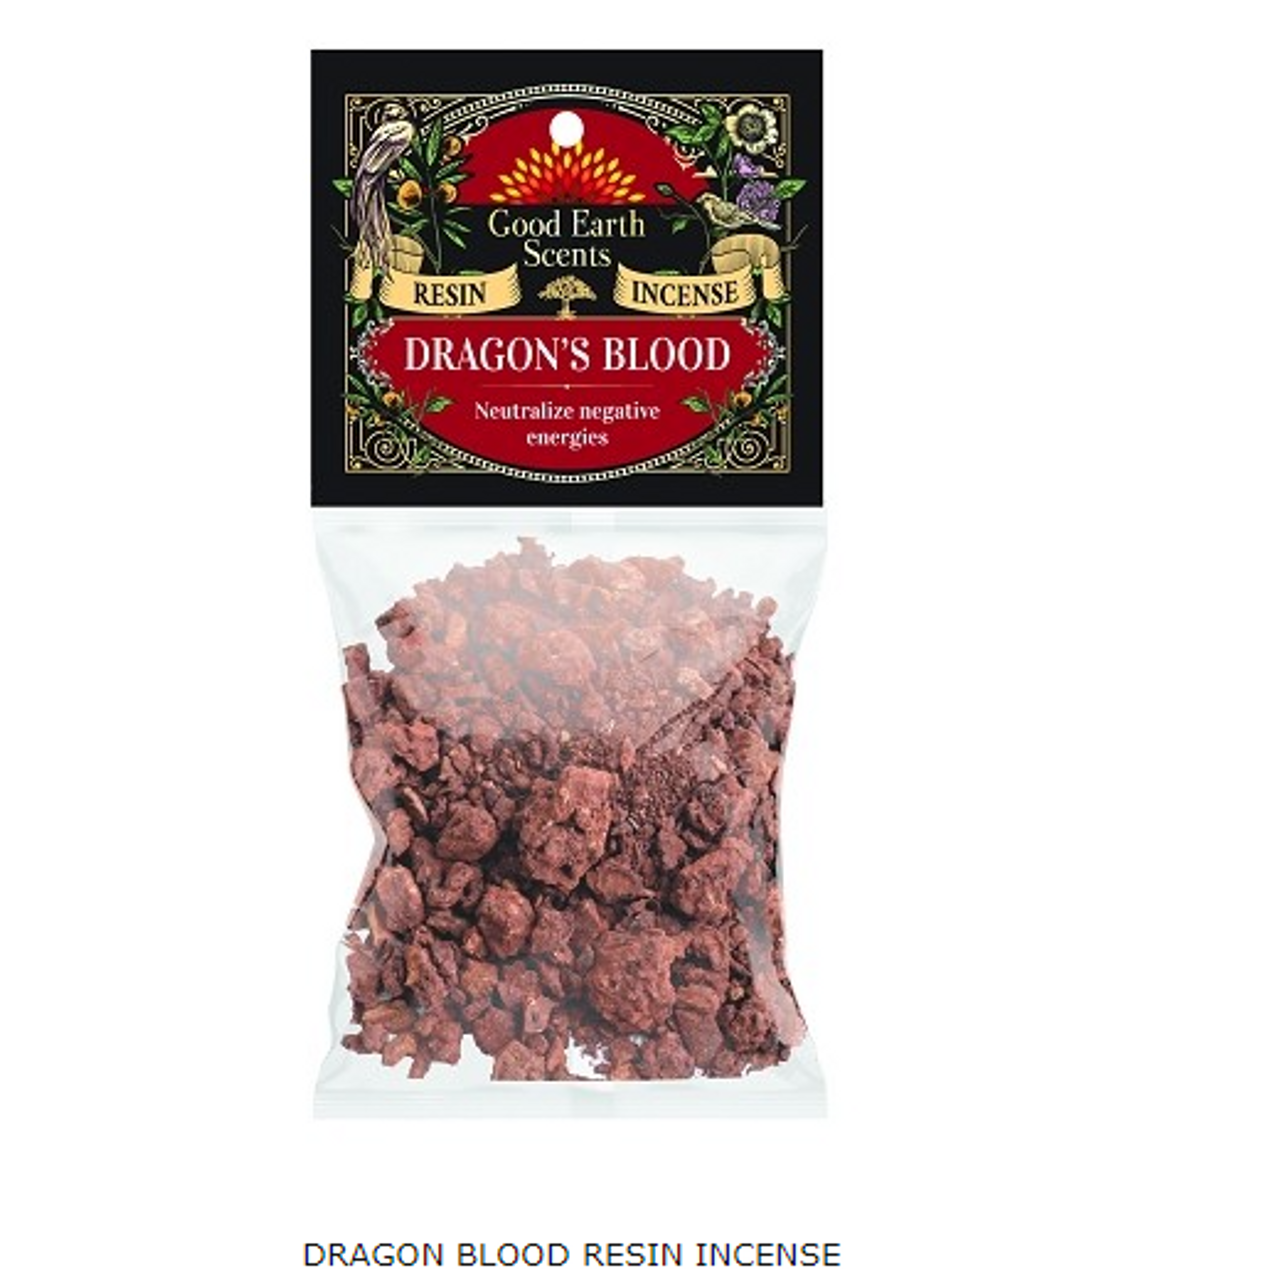 Dragon Blood Resin - Good Earth Soul Sticks Scents Resin Incense